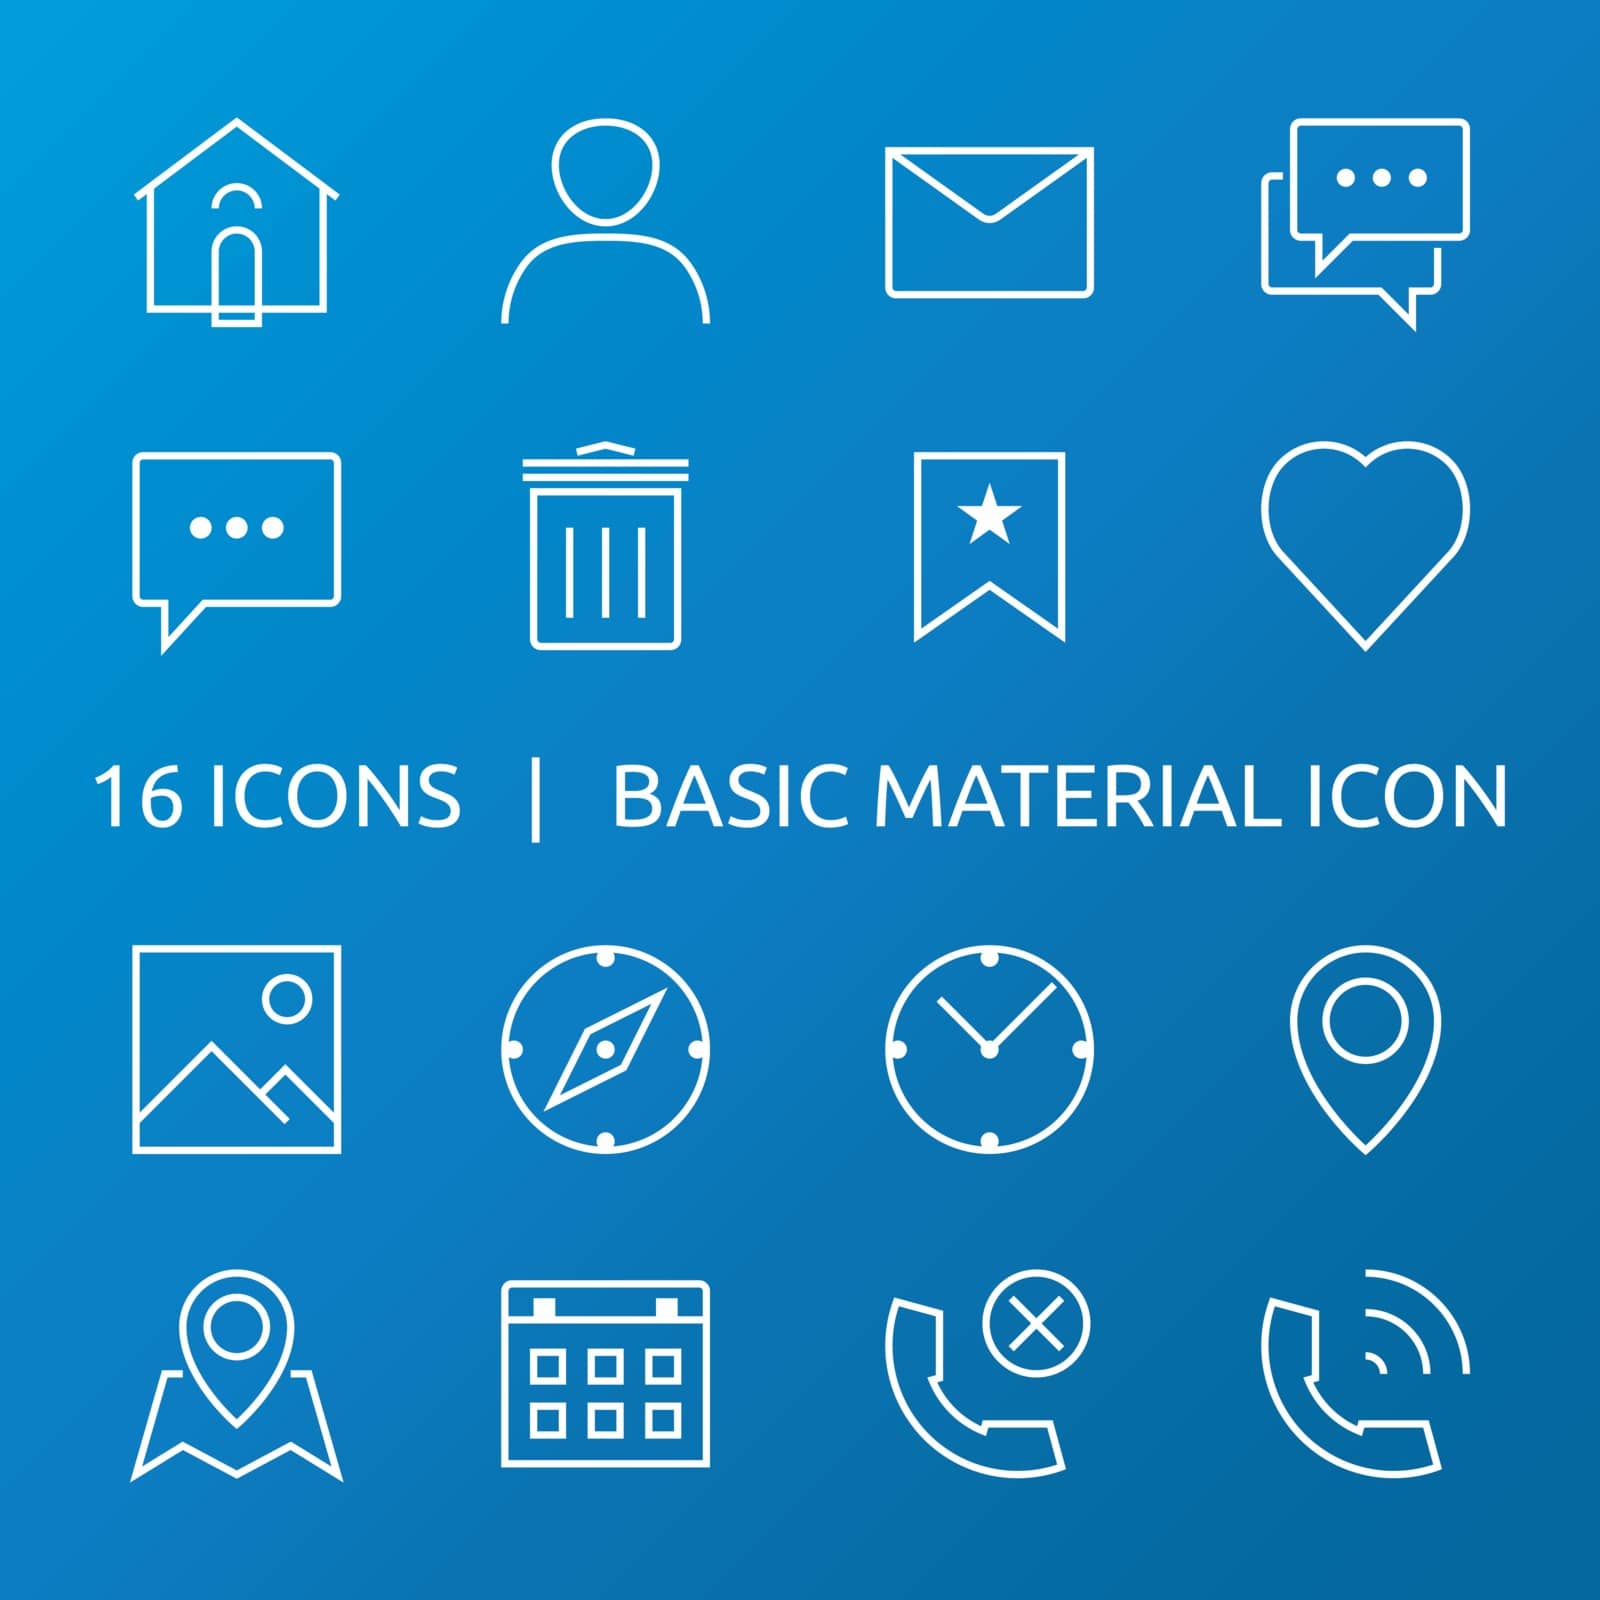 basic material icon. outline icon set.